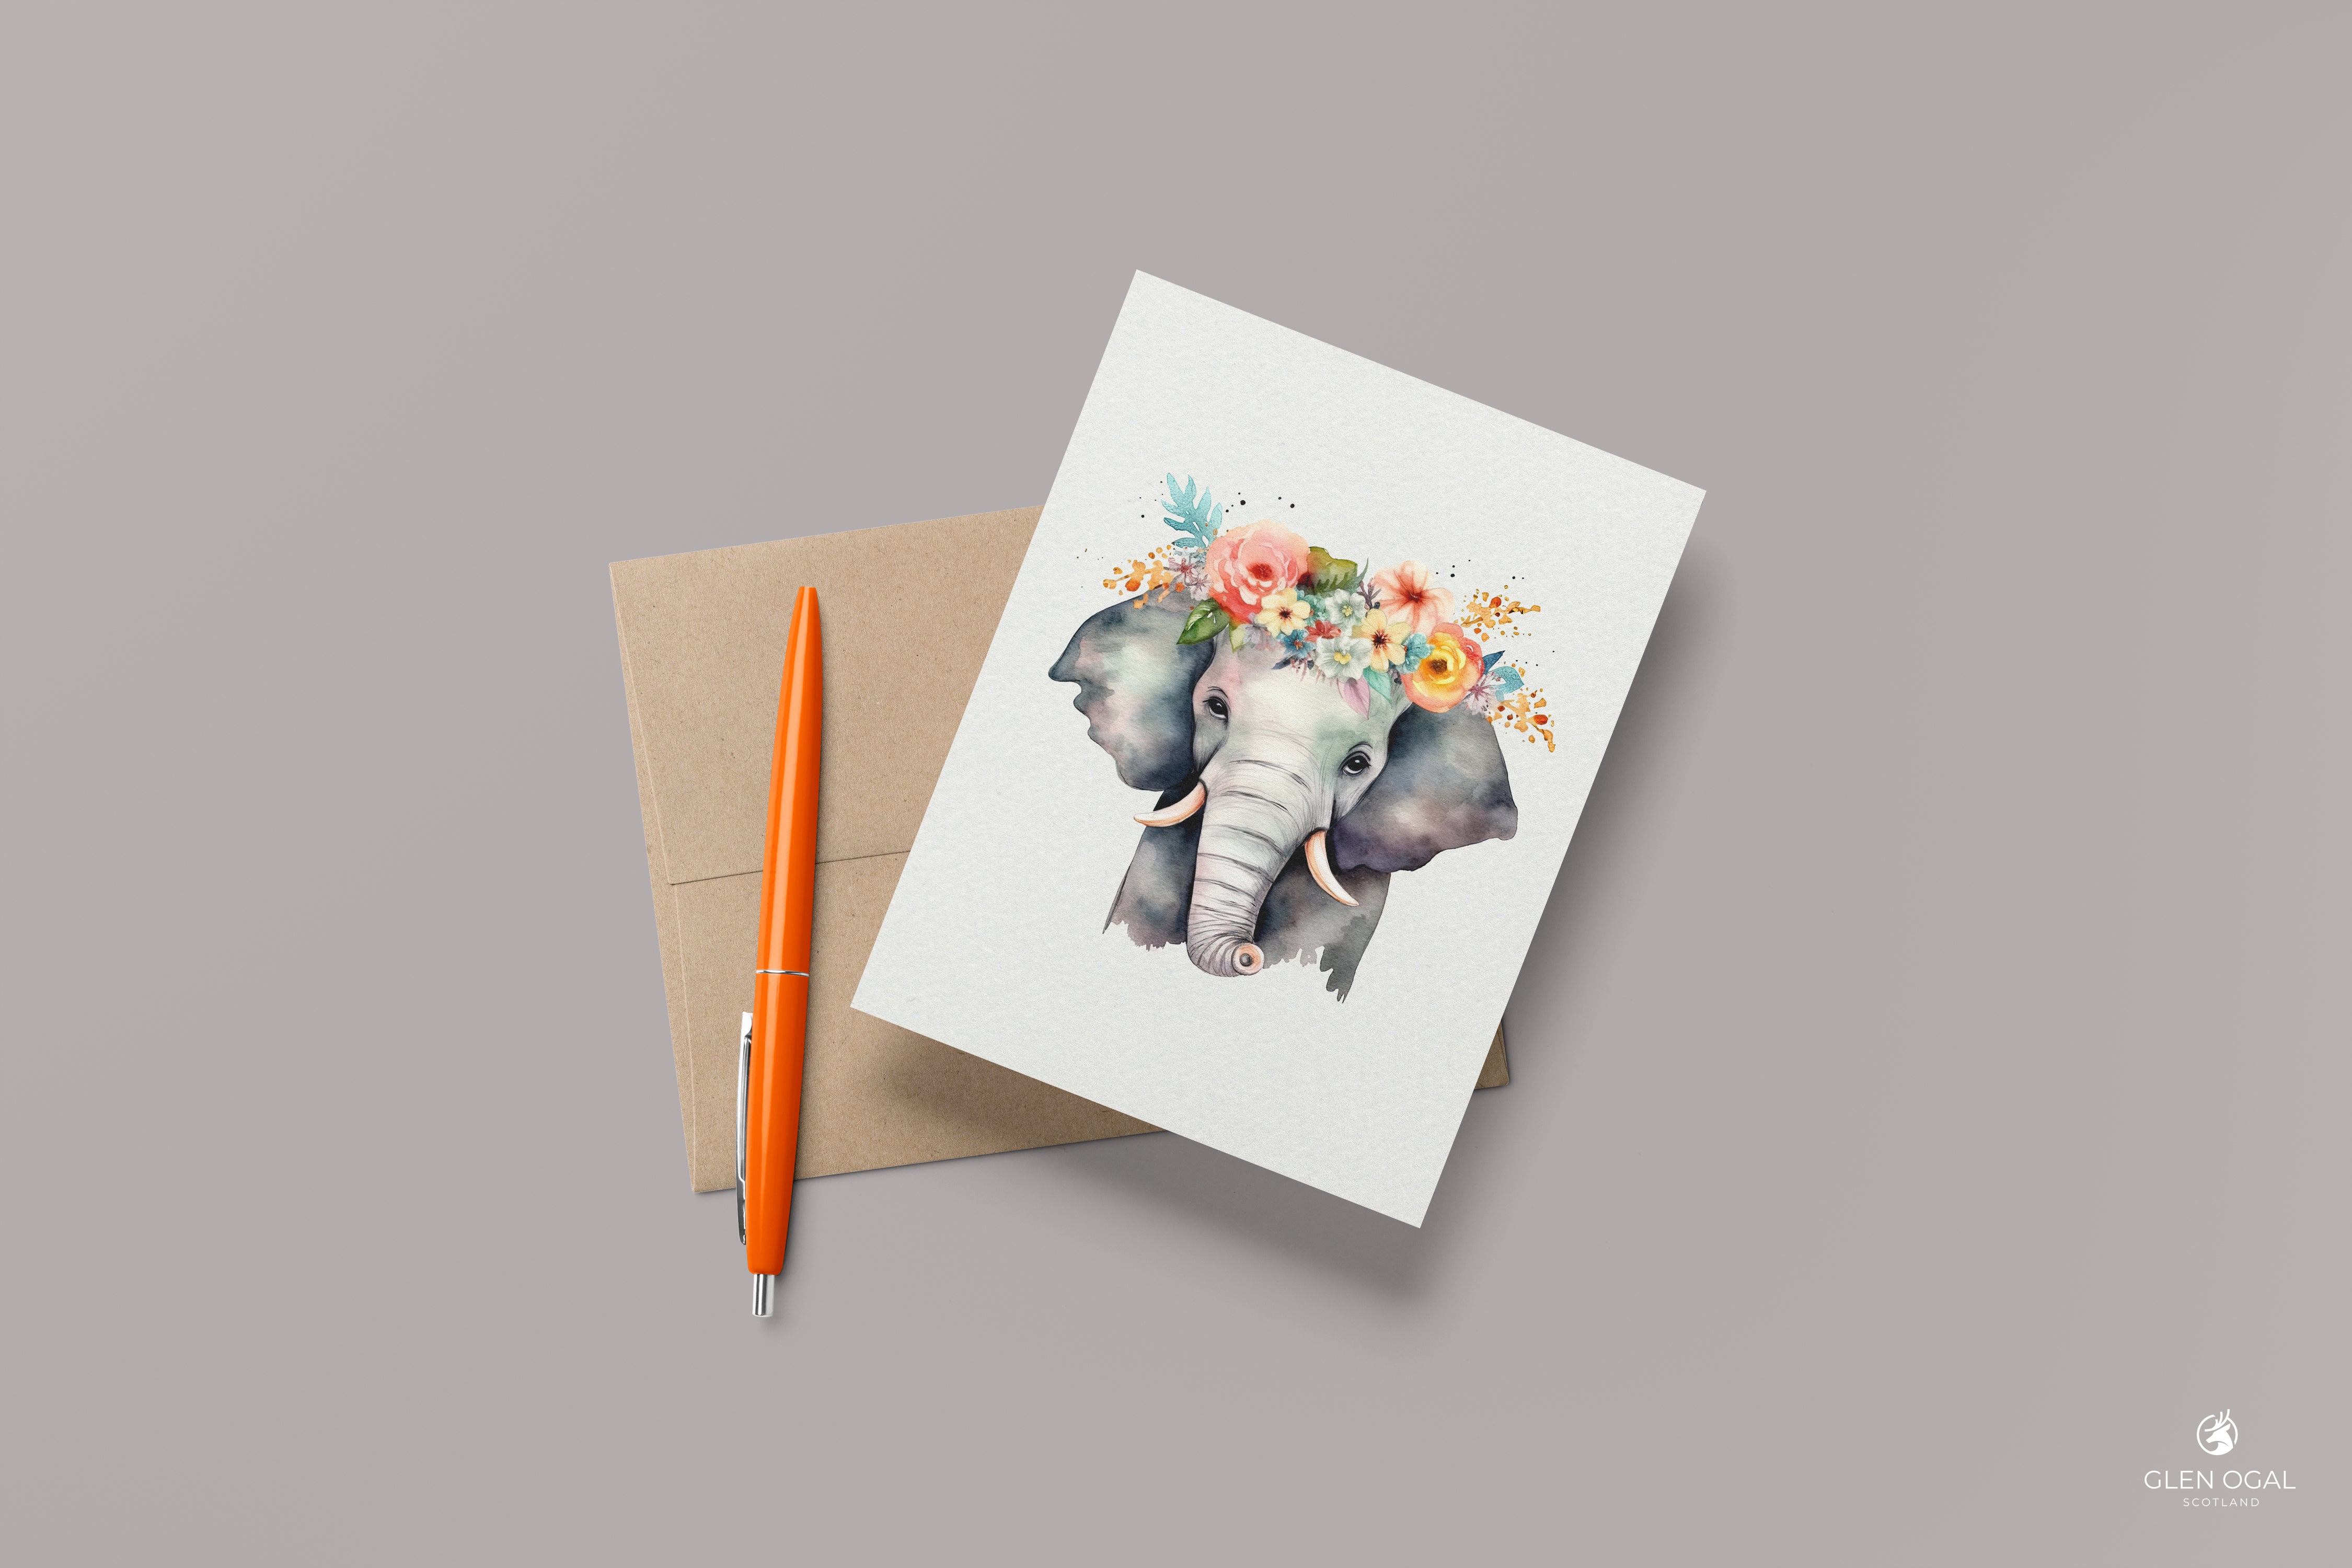 Pack of 5 Floral Elephant Note Cards